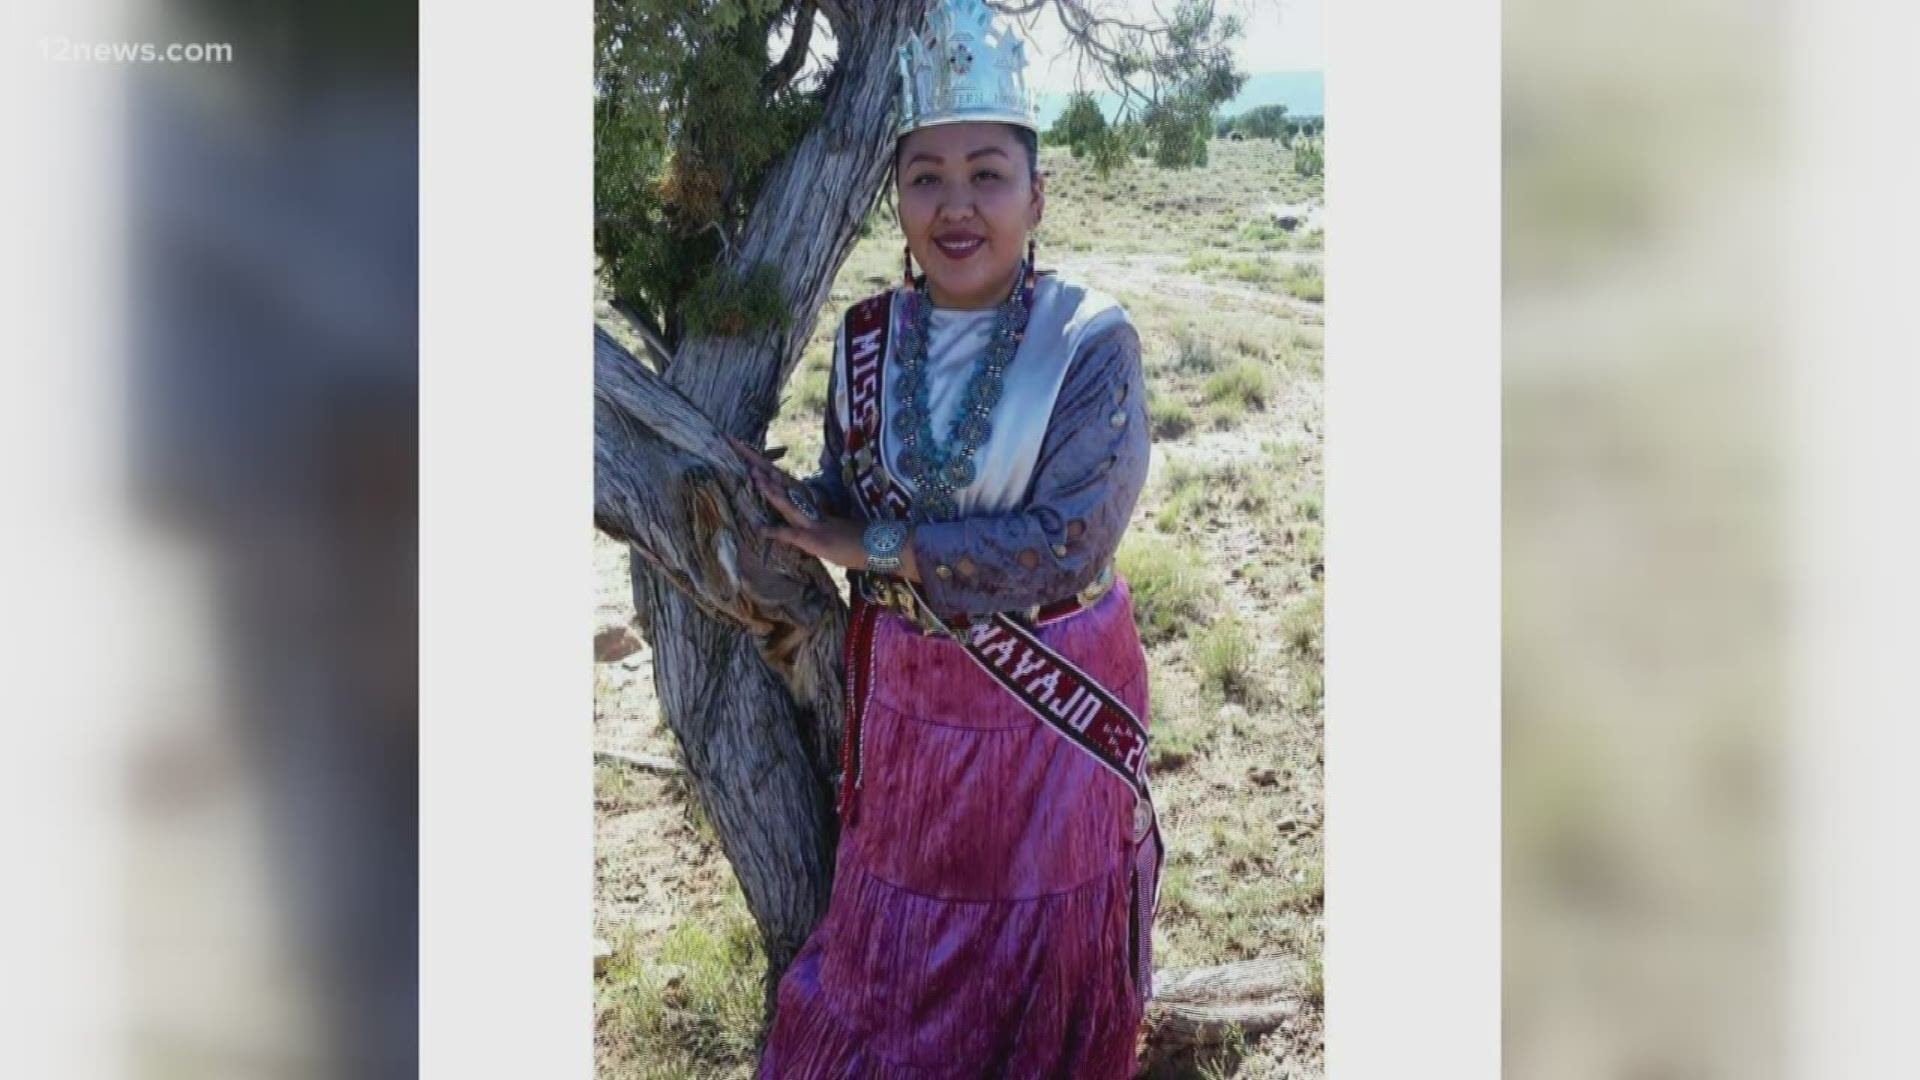 Valentina Blackhorse, 28, was crowned Miss Western Navajo 2015-2016 and competed in the Miss Indian World Pageant.